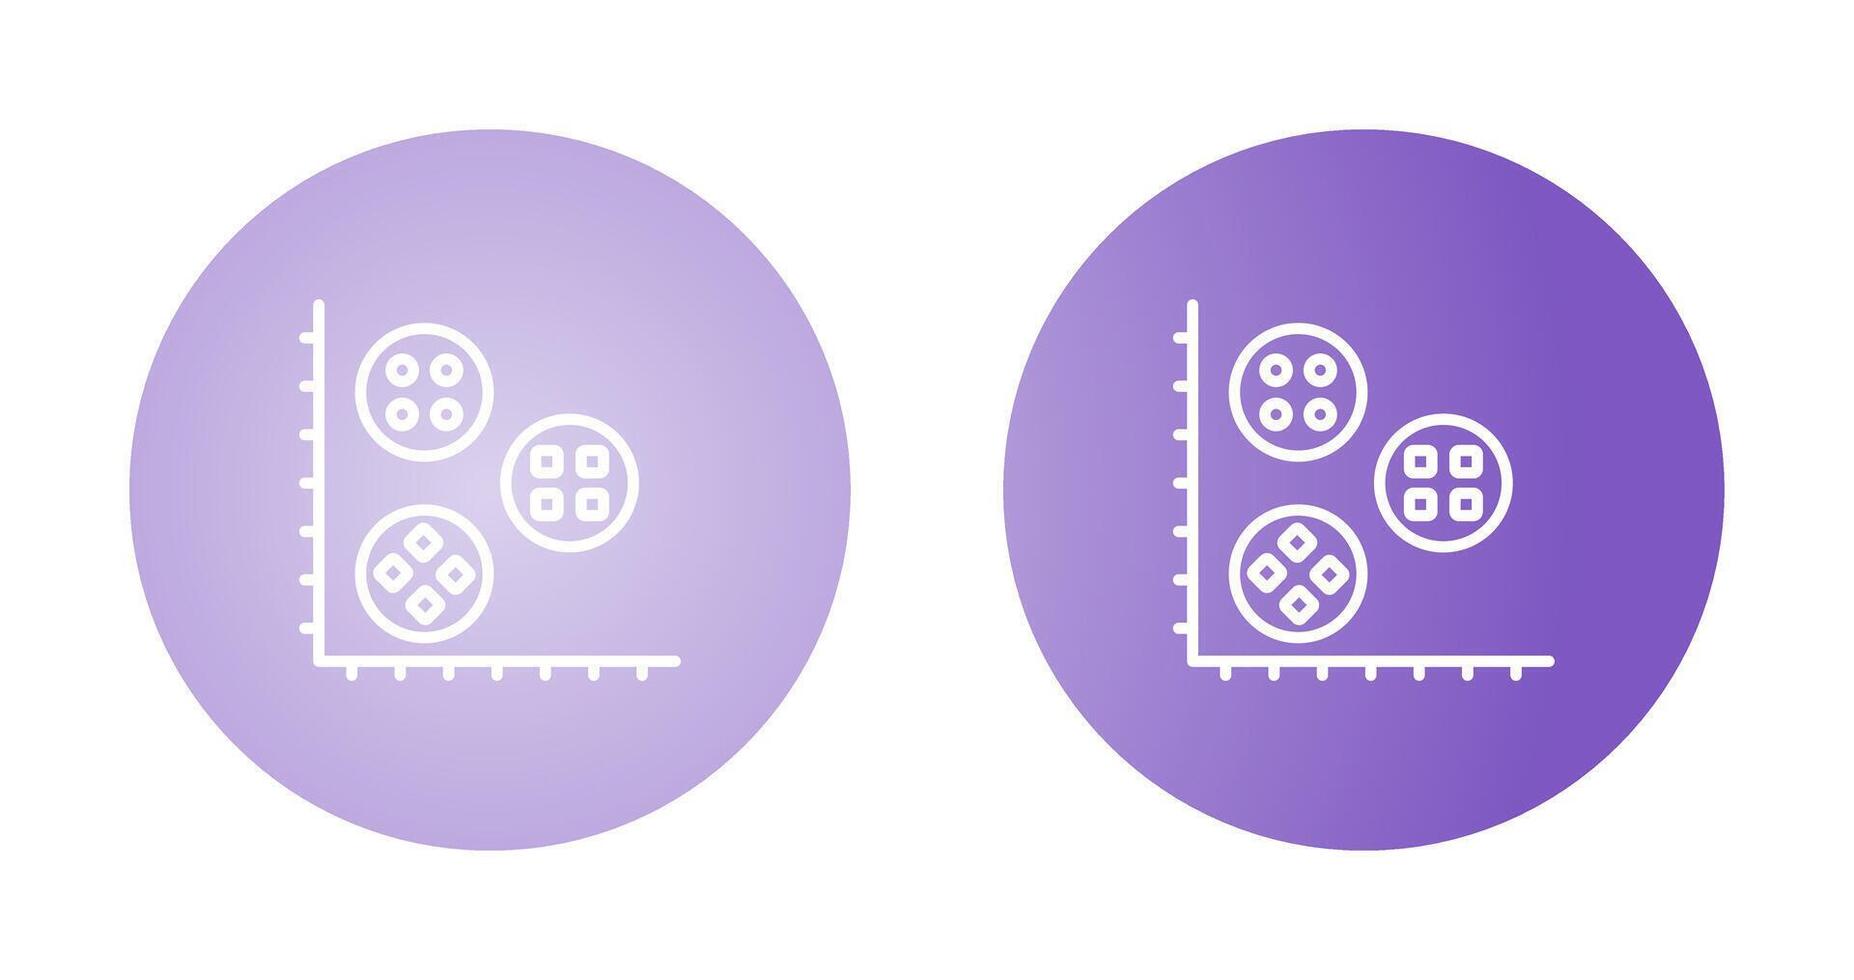 Cluster Analysis Vector Icon